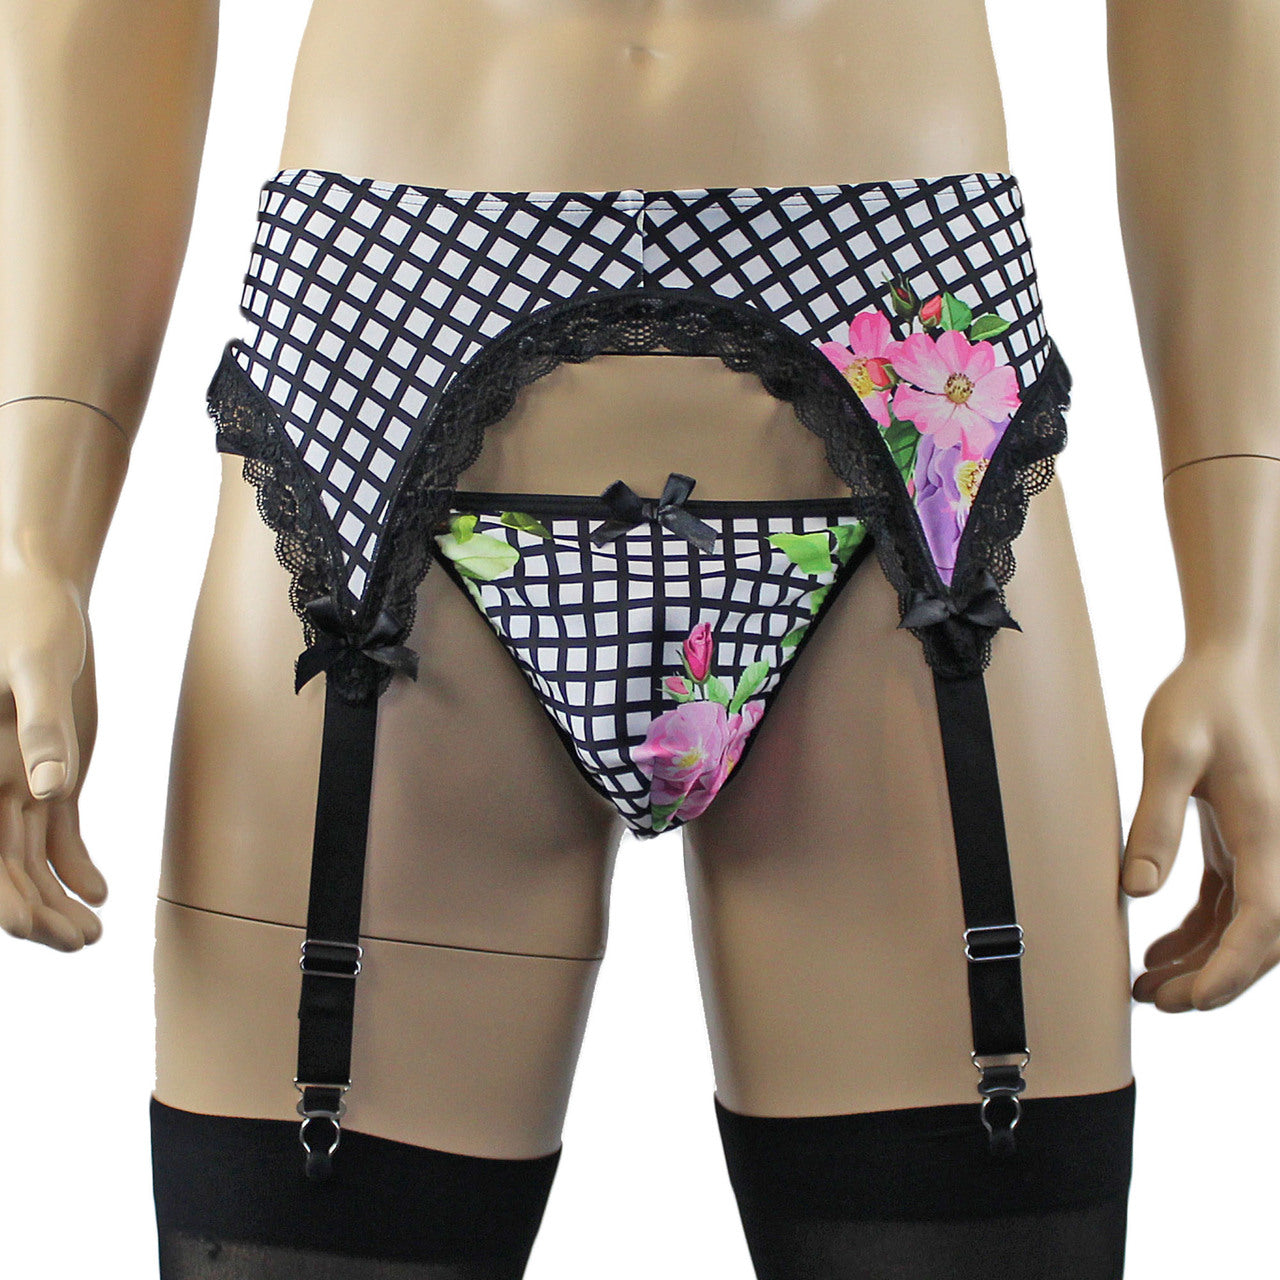 Mens Diana Garterbelt & G string Pouch in our Flower Checkered Print Spandex